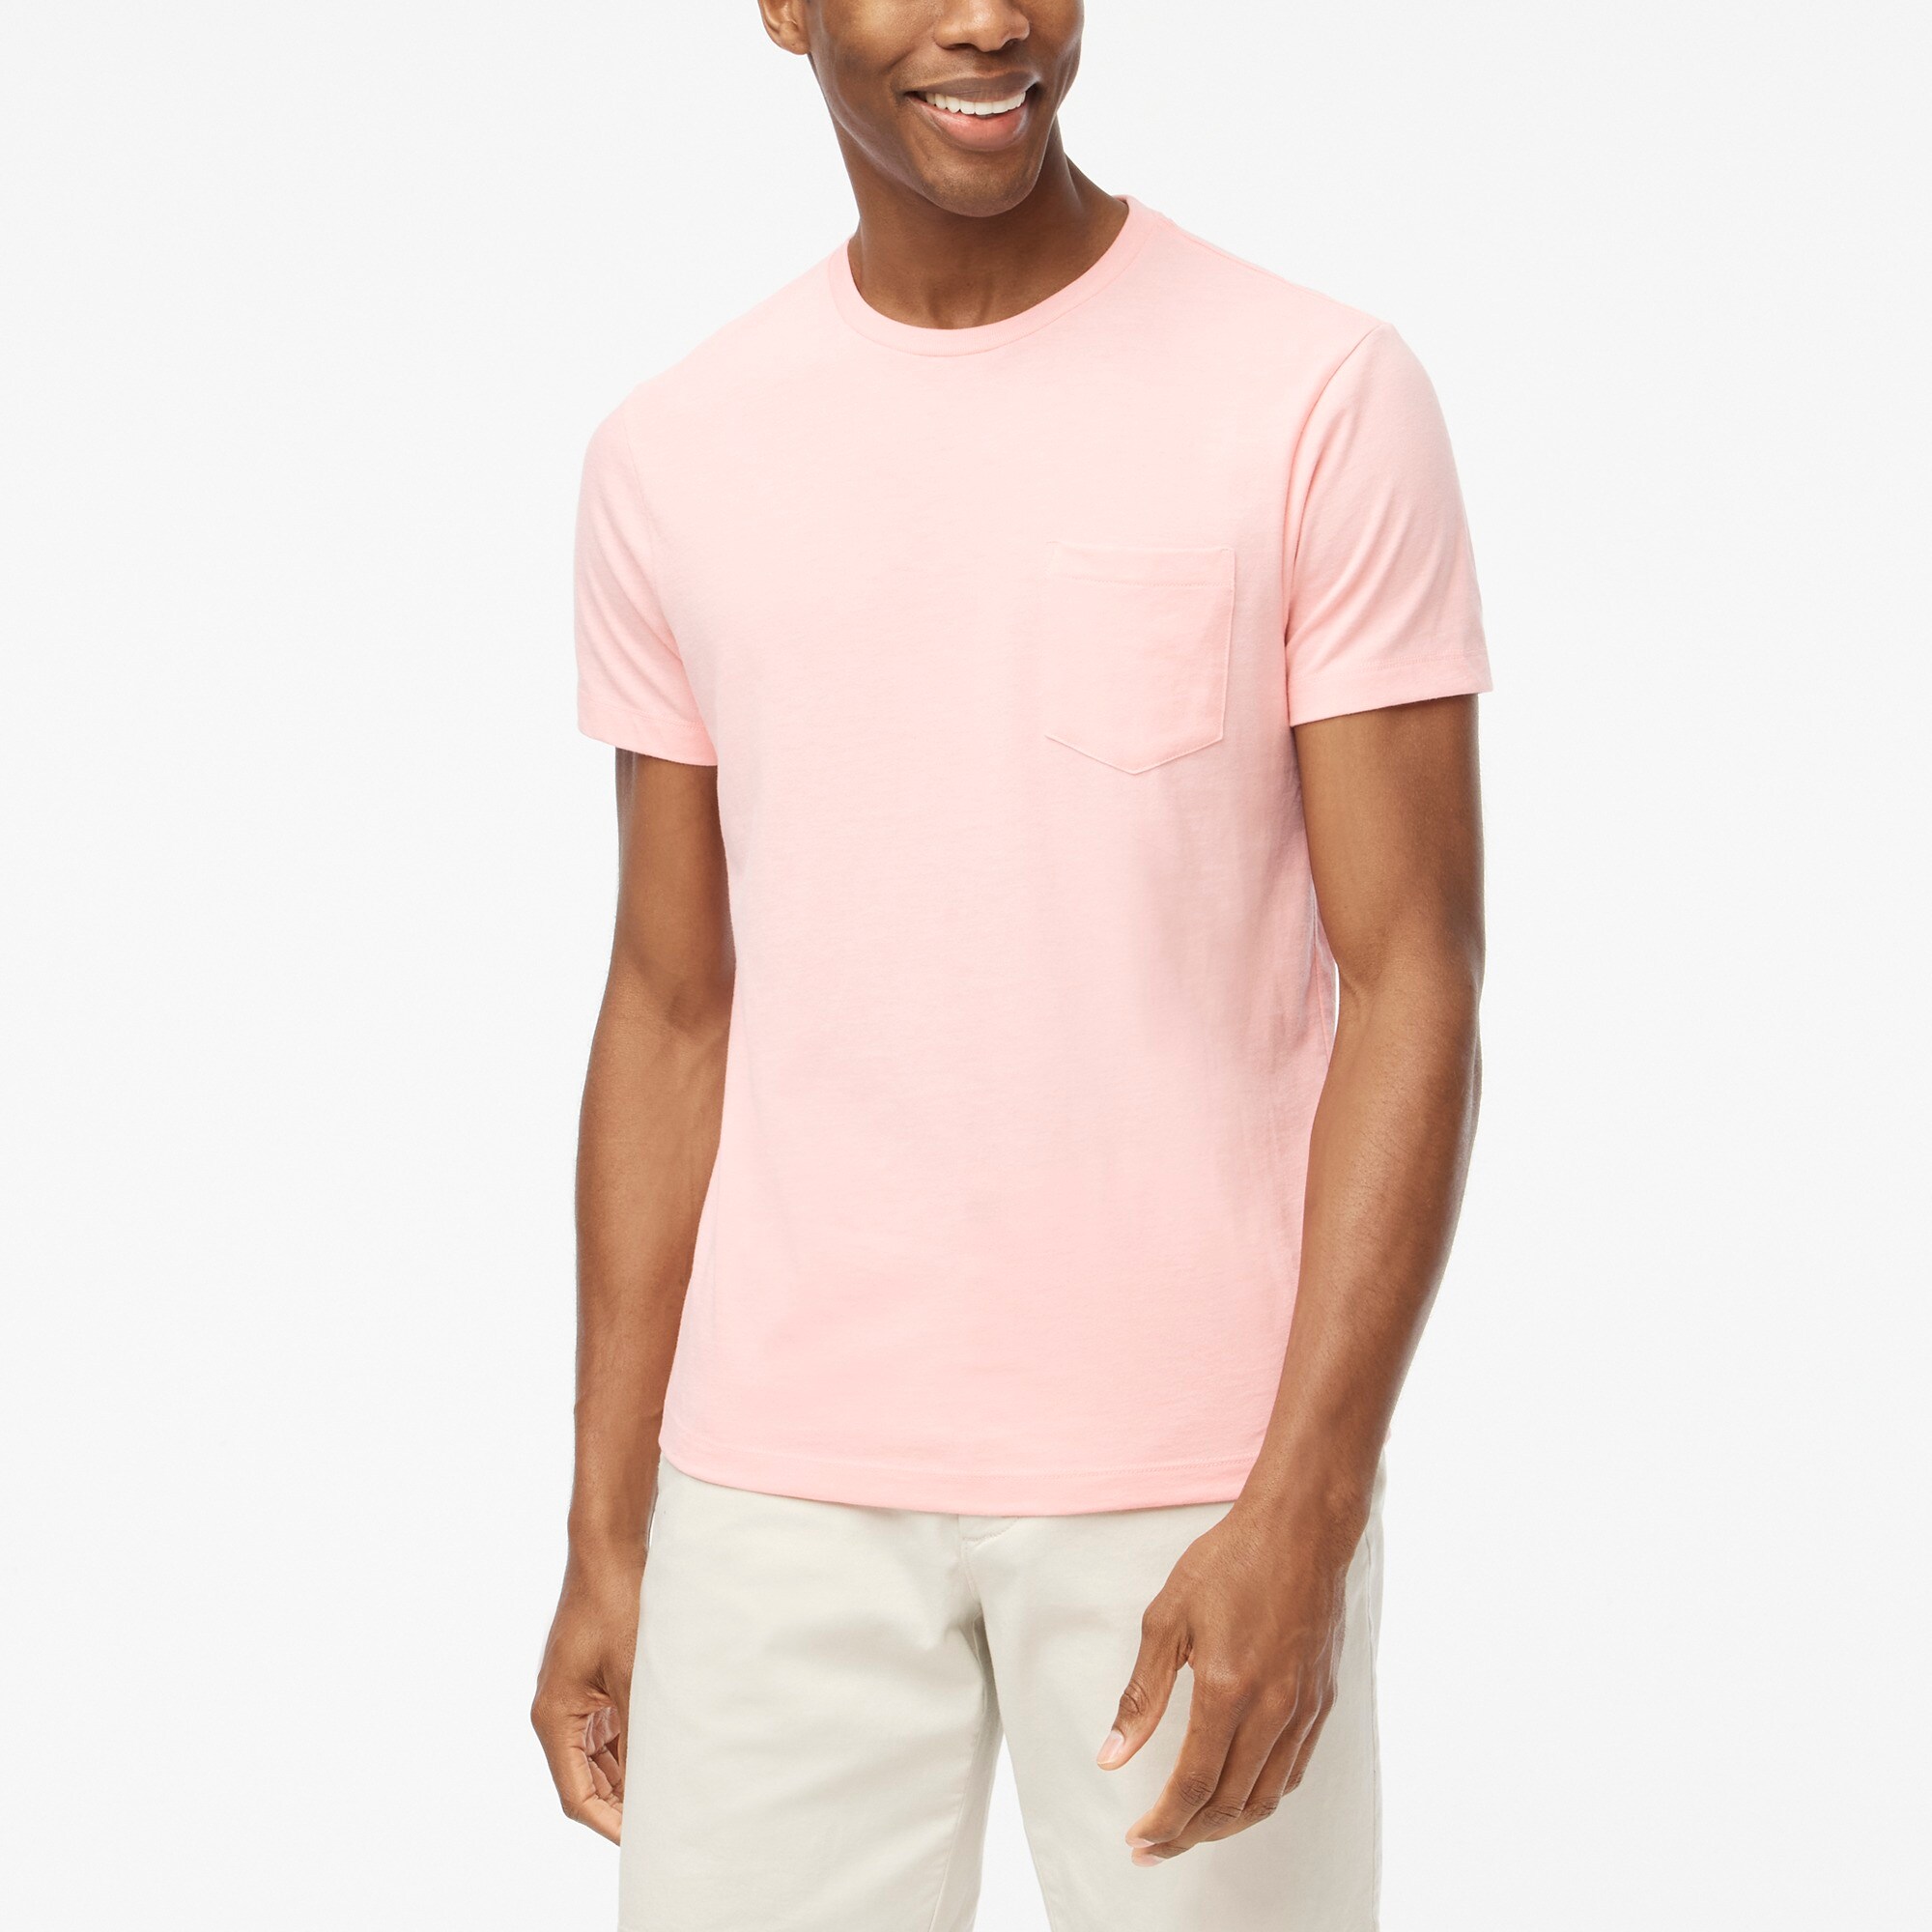  Cotton-blend washed jersey pocket tee